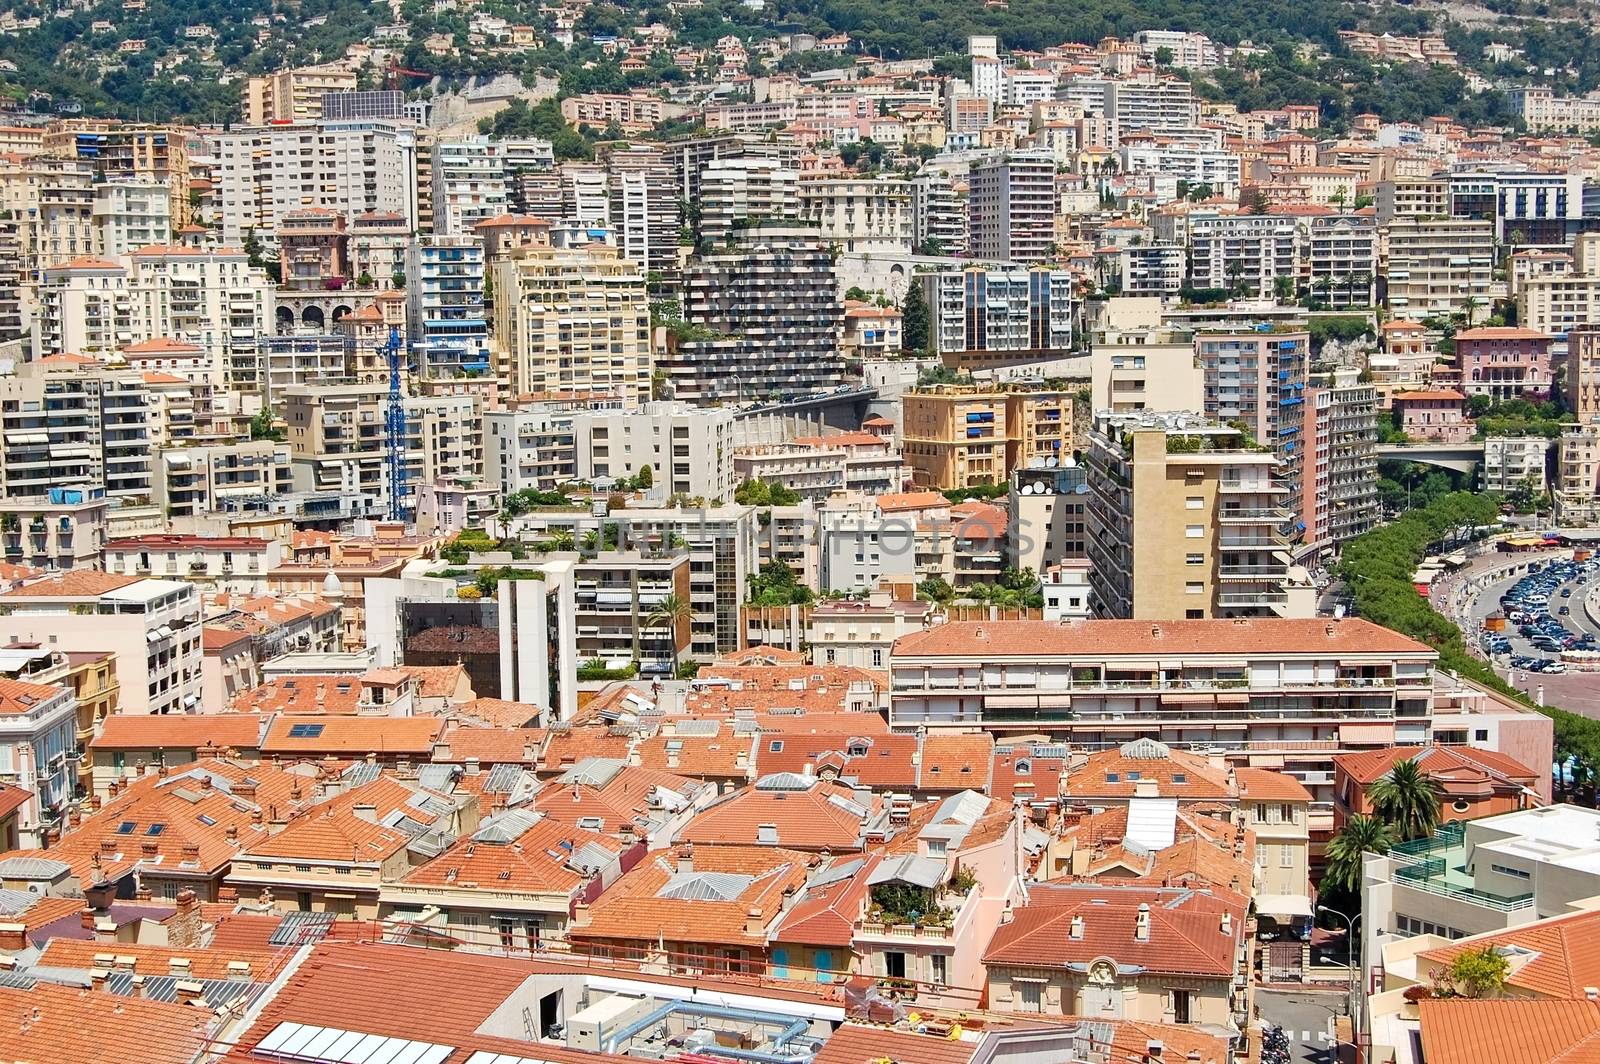 View of Monaco, Monte Carlo. A lot of buildings on a very small area.